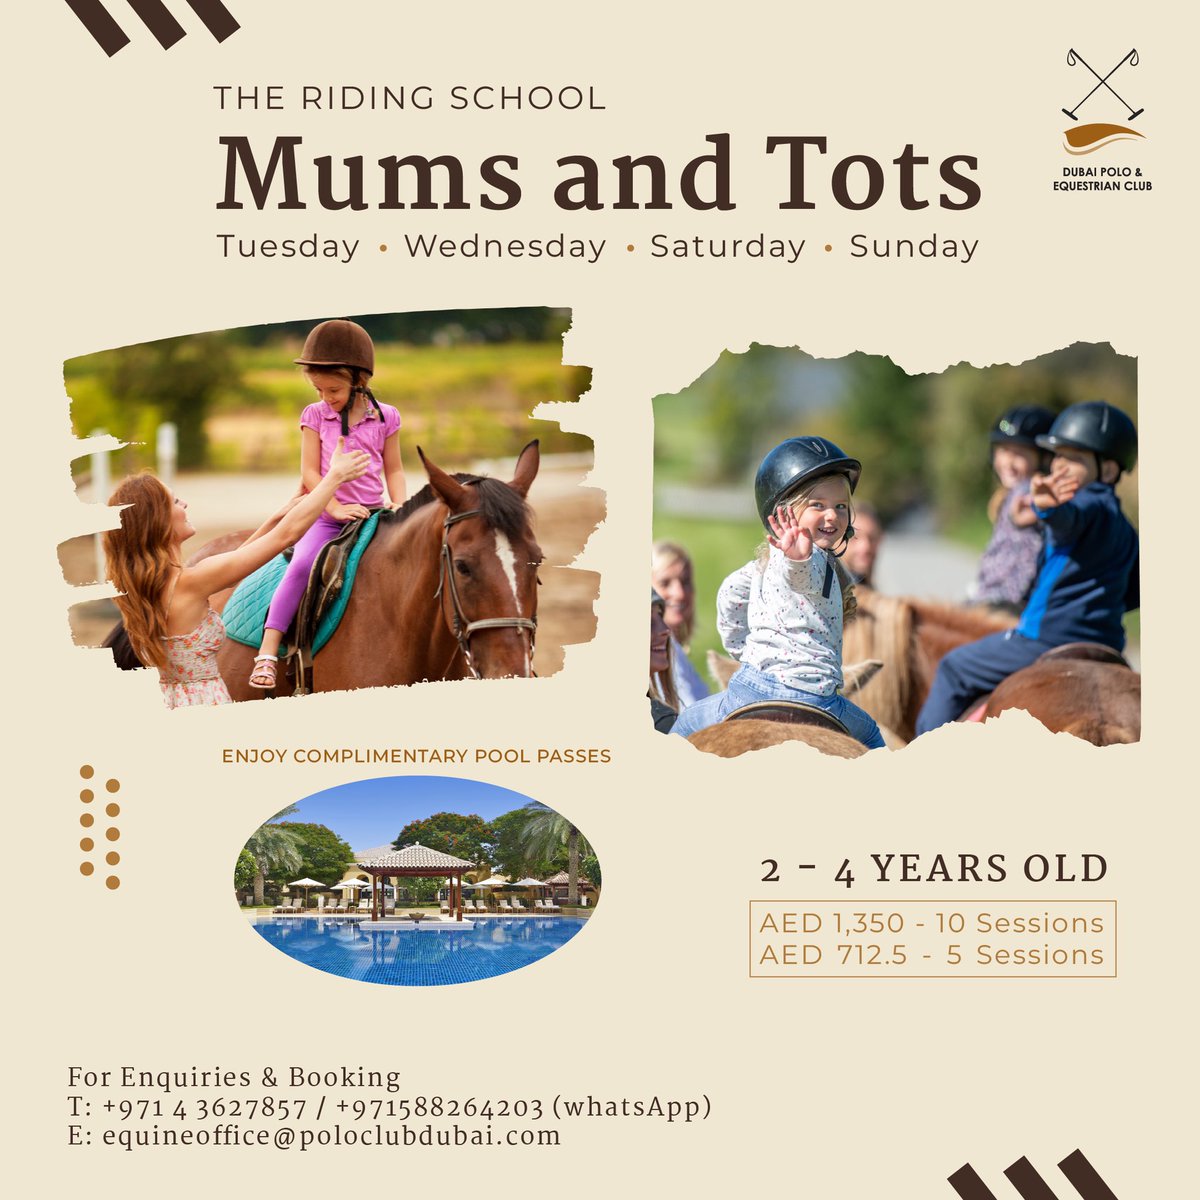 Mum & me time! Treat your little one with an exciting pony ride experience every Tuesday, Wednesday, Saturday & Sunday, for kids aged 2 to 4. The best part? Enjoy the rest of the afternoon with complimentary pool passes. For bookings, contact +971 4 362 7857 or +971 58 826 4203